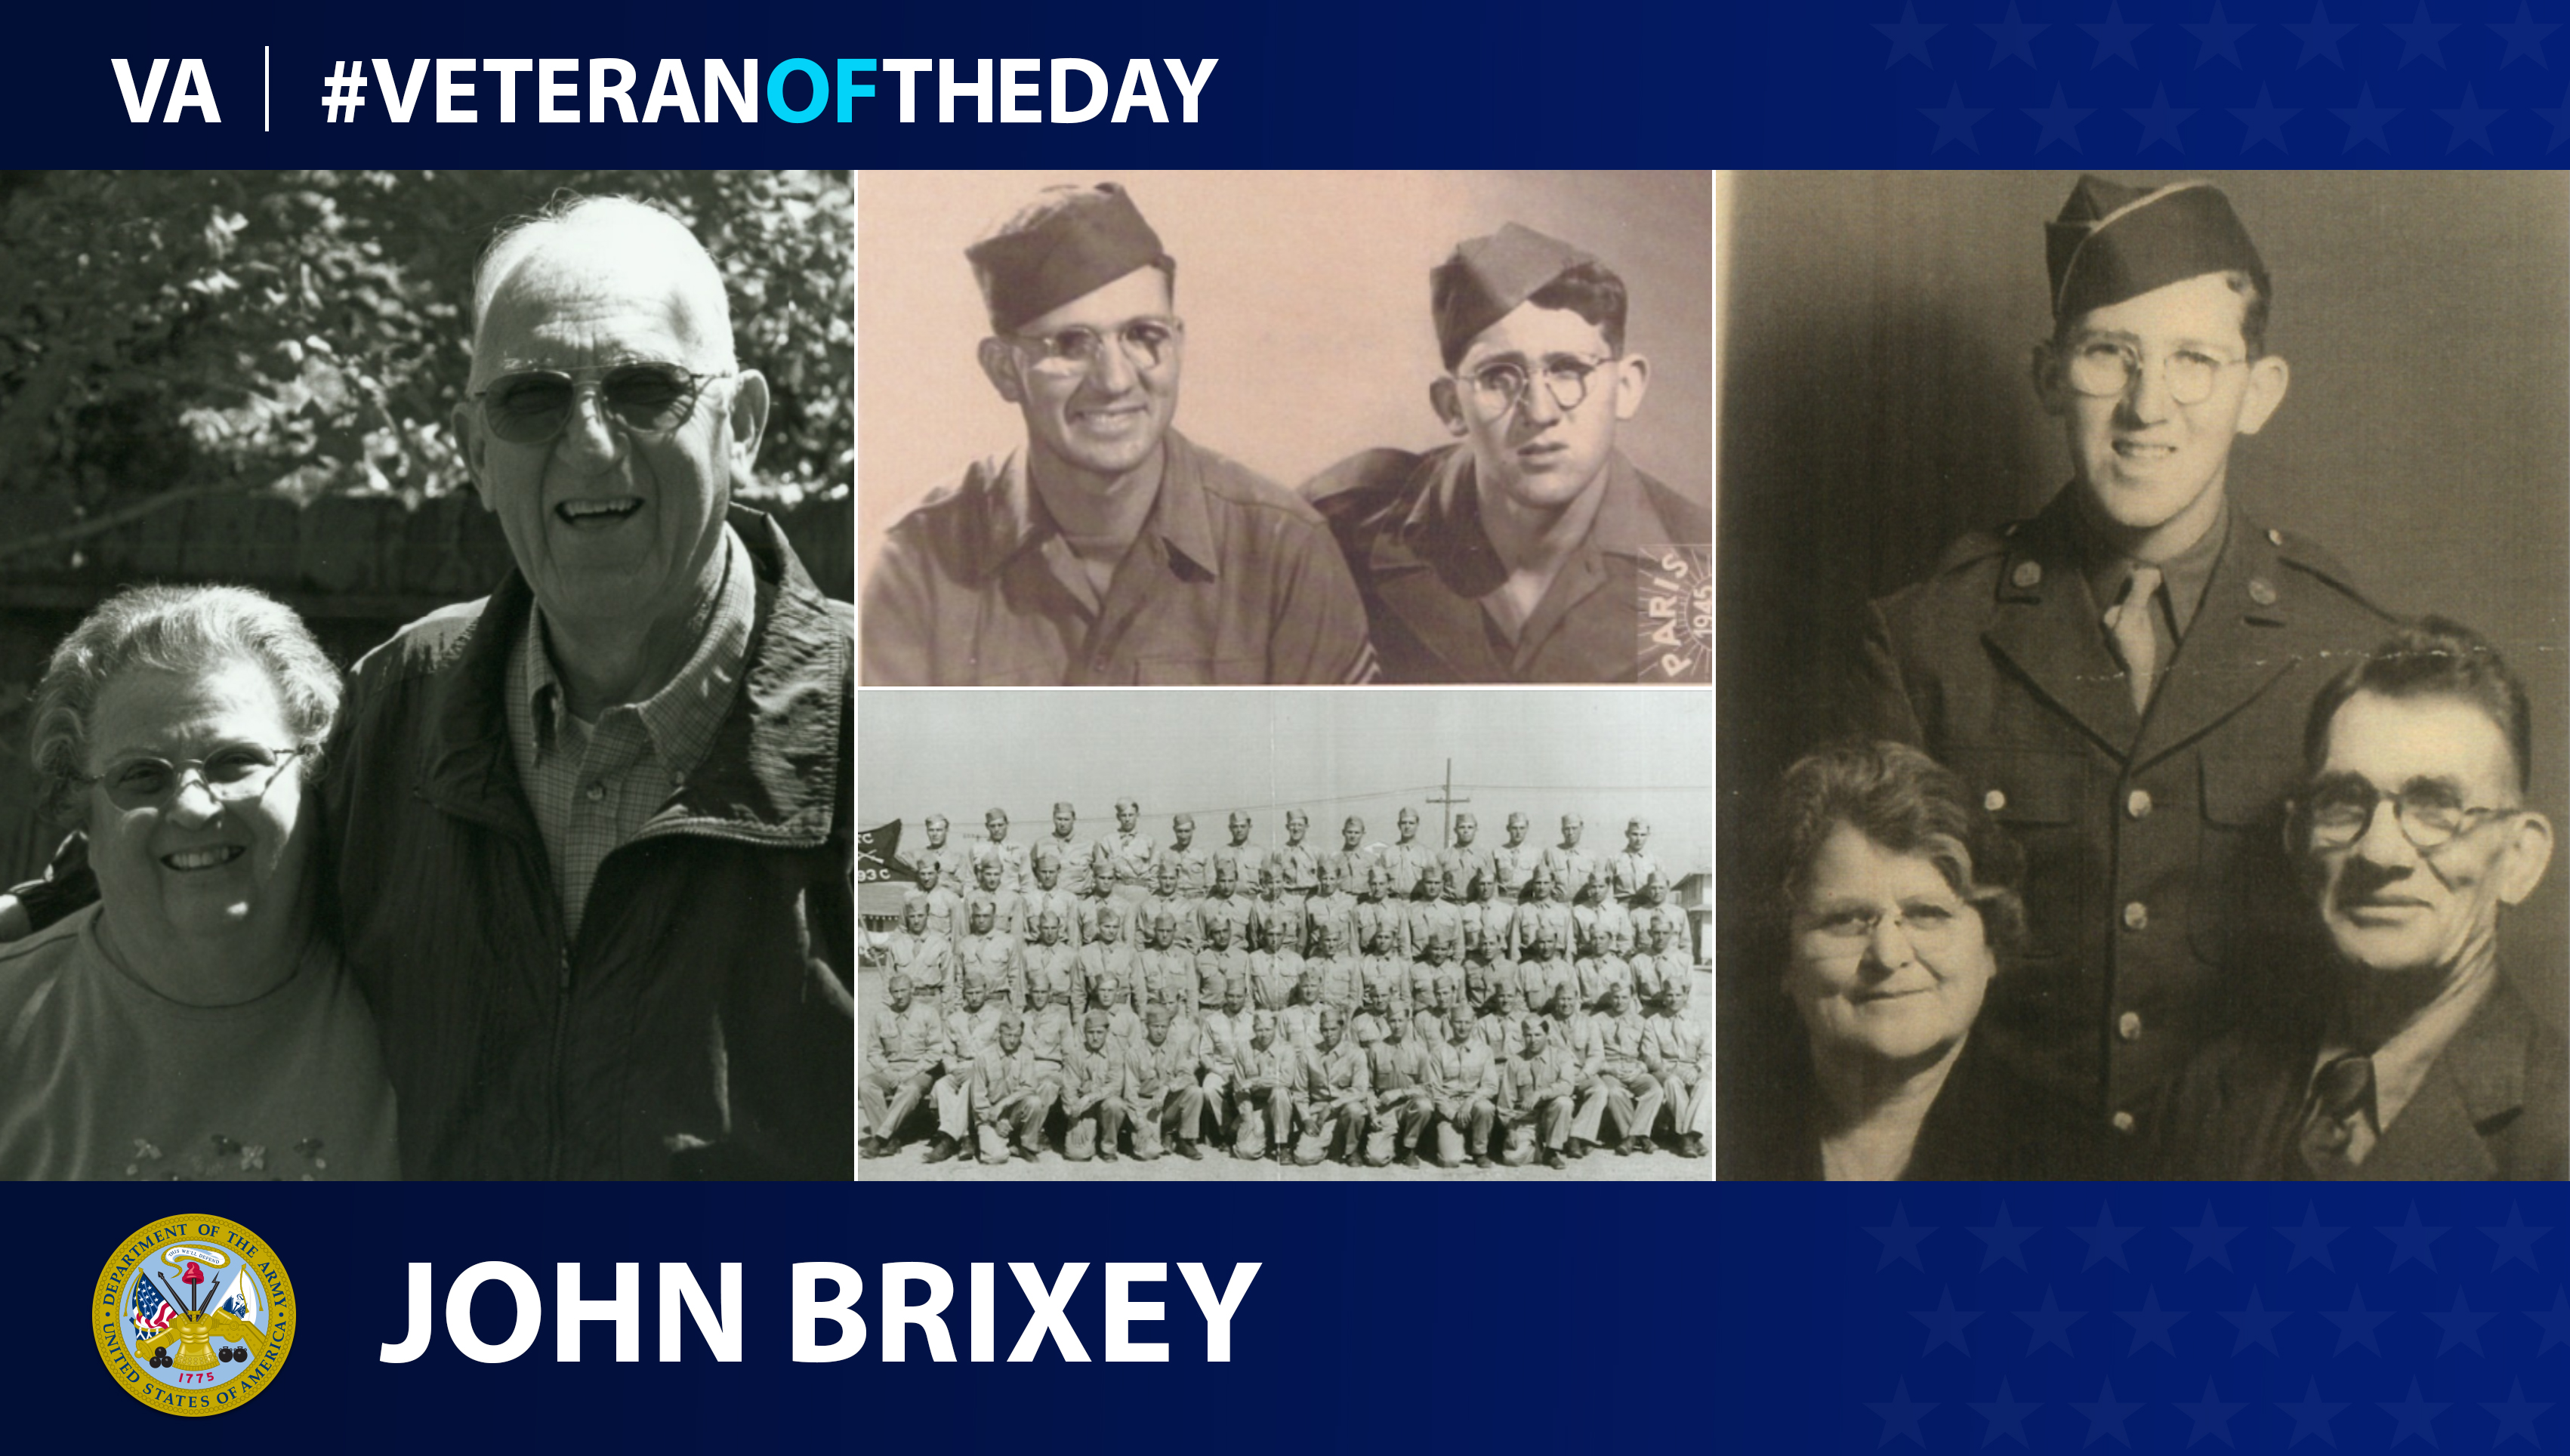 John Brixey is today's Veteran of the Day.